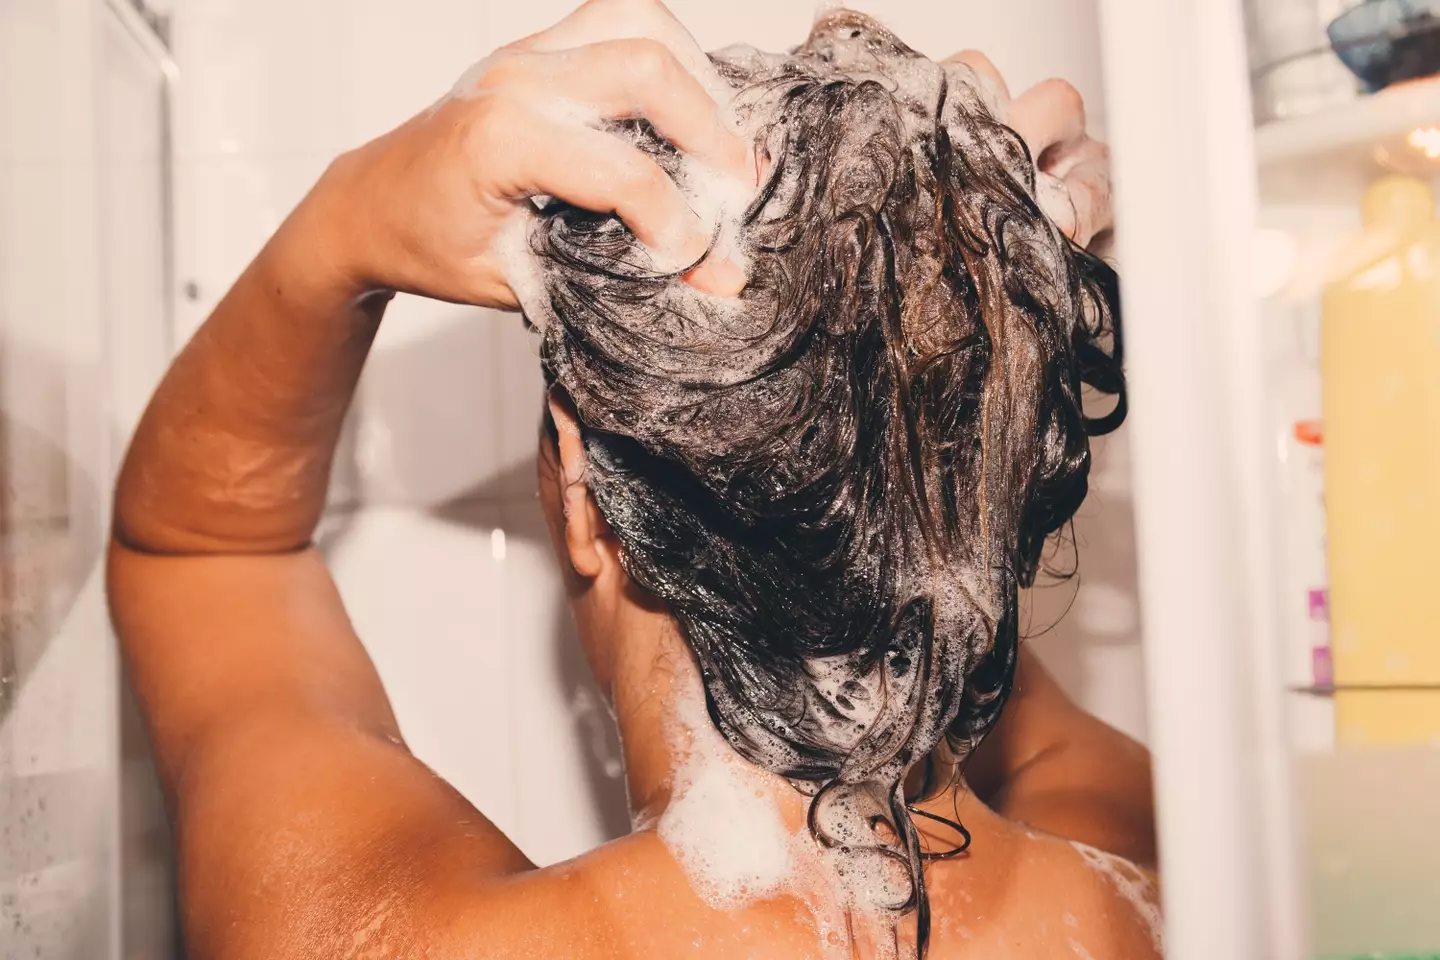 Apparently, washing your hair with hot water can cause serious dryness.